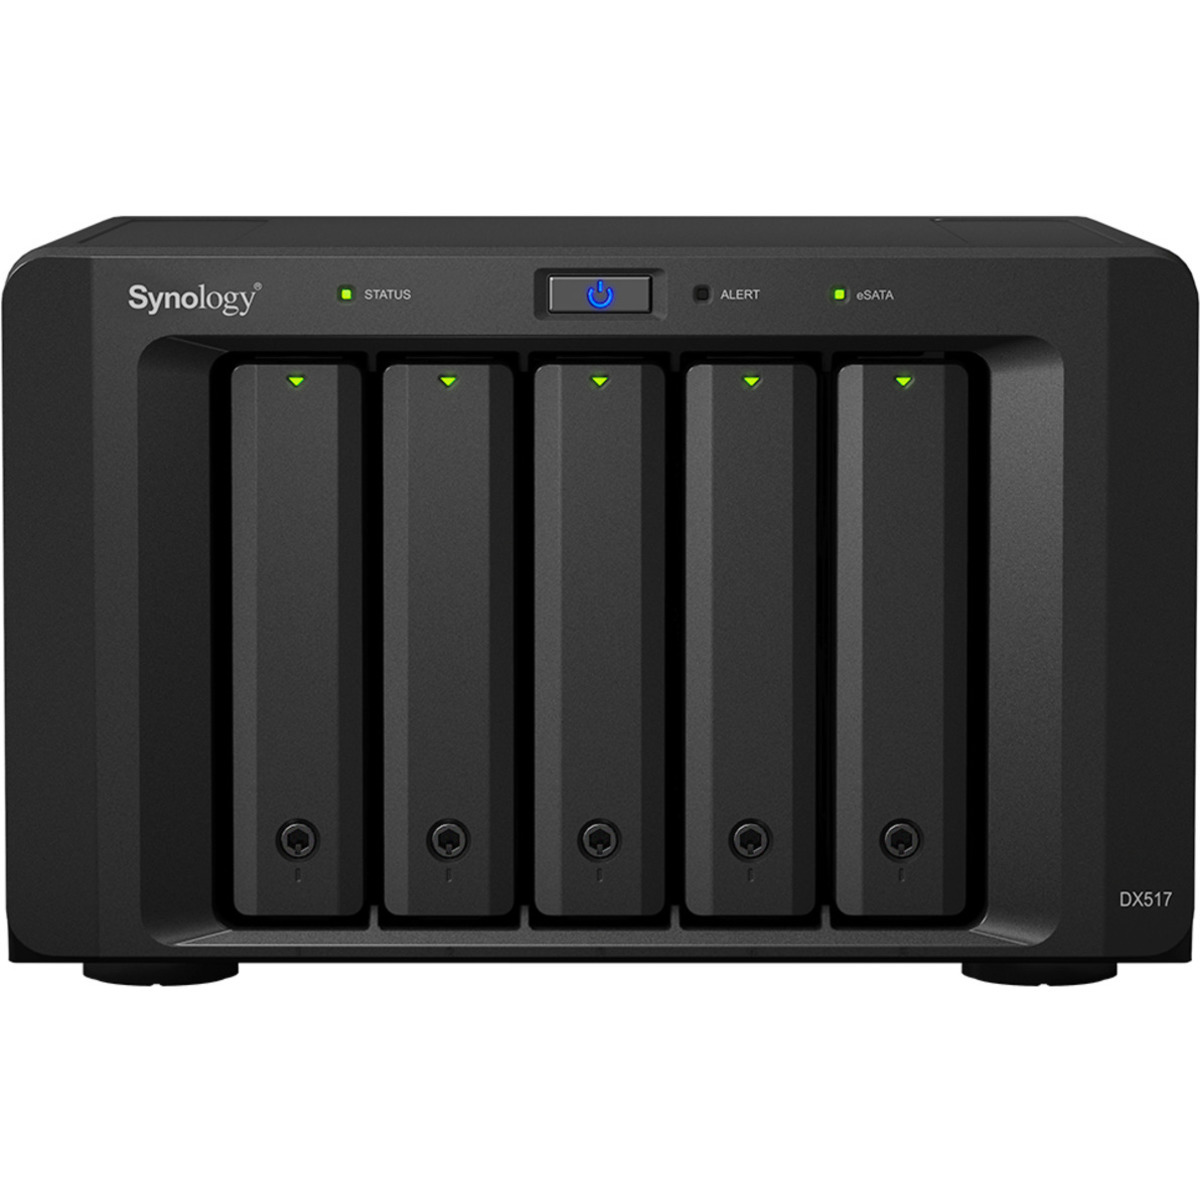 Synology DX517 External Expansion Drive 60tb 5-Bay Desktop Multimedia / Power User / Business Expansion Enclosure 3x20tb Western Digital Red Pro WD201KFGX 3.5 7200rpm SATA 6Gb/s HDD NAS Class Drives Installed - Burn-In Tested DX517 External Expansion Drive